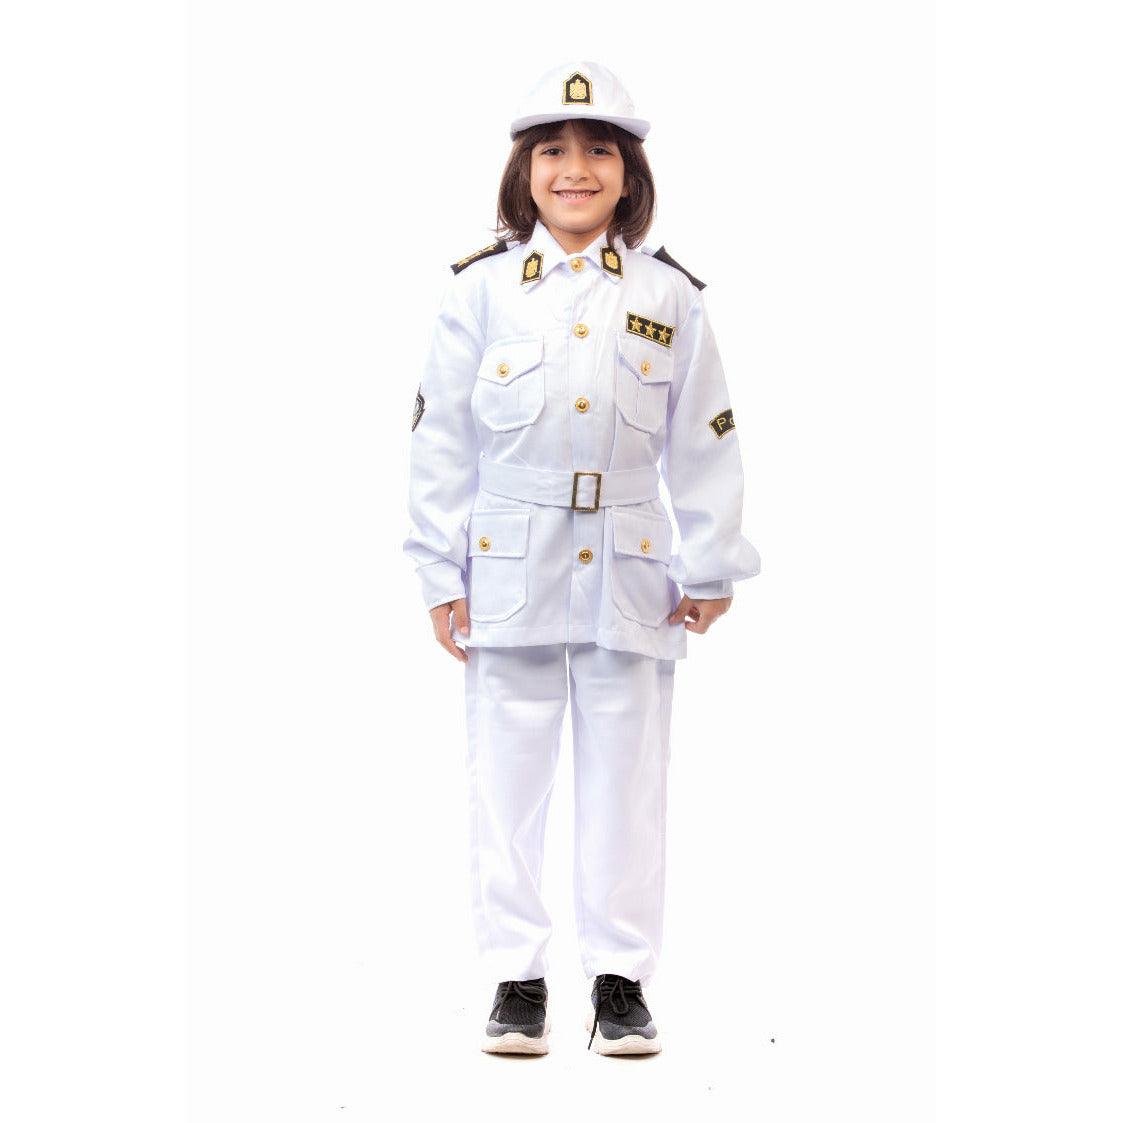 Policeman Costume - White - Ourkids - M&A